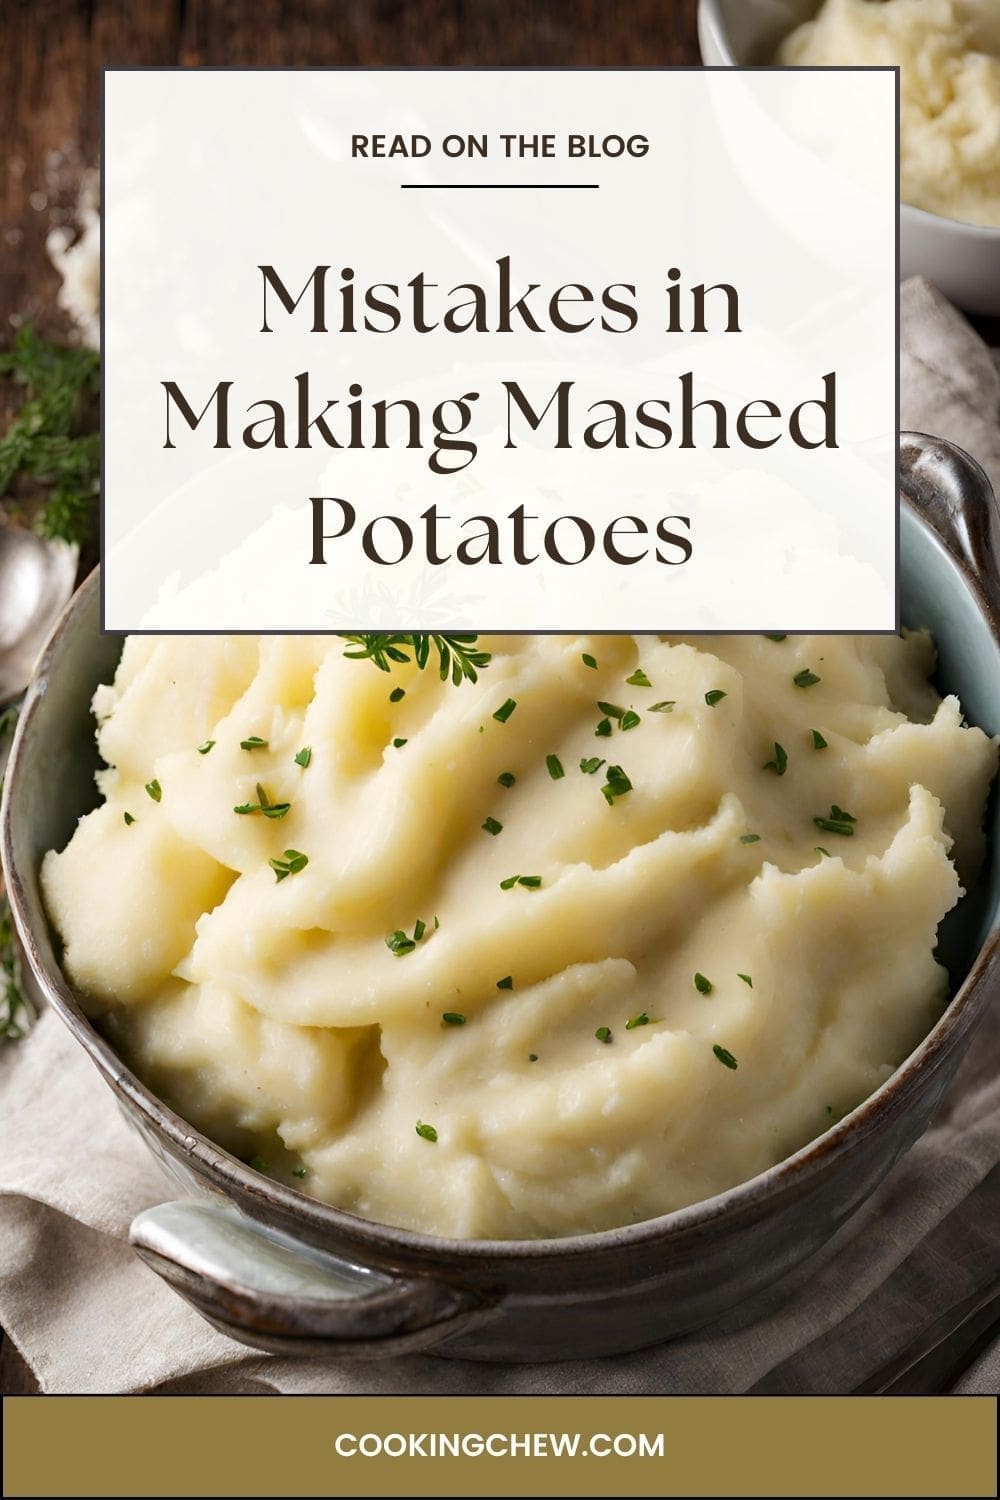 A photo of a bowl of mashed potatoes on a wooden table.